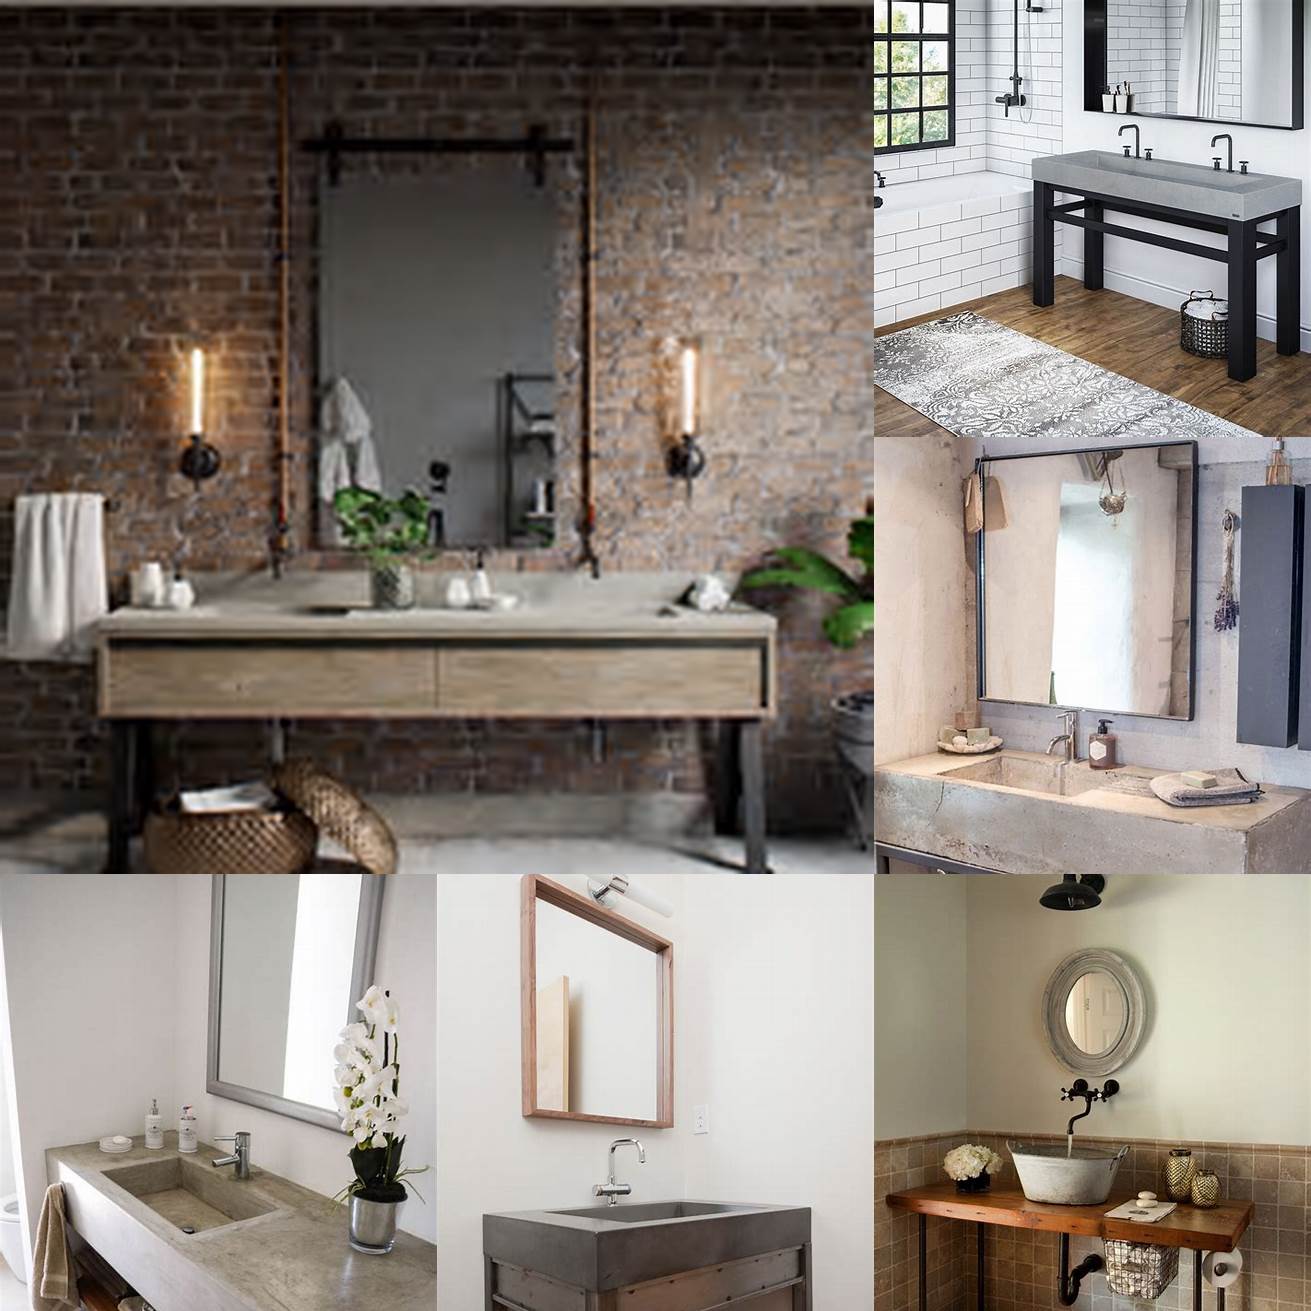 Image of an industrial style bathroom with a metal vanity and concrete sink